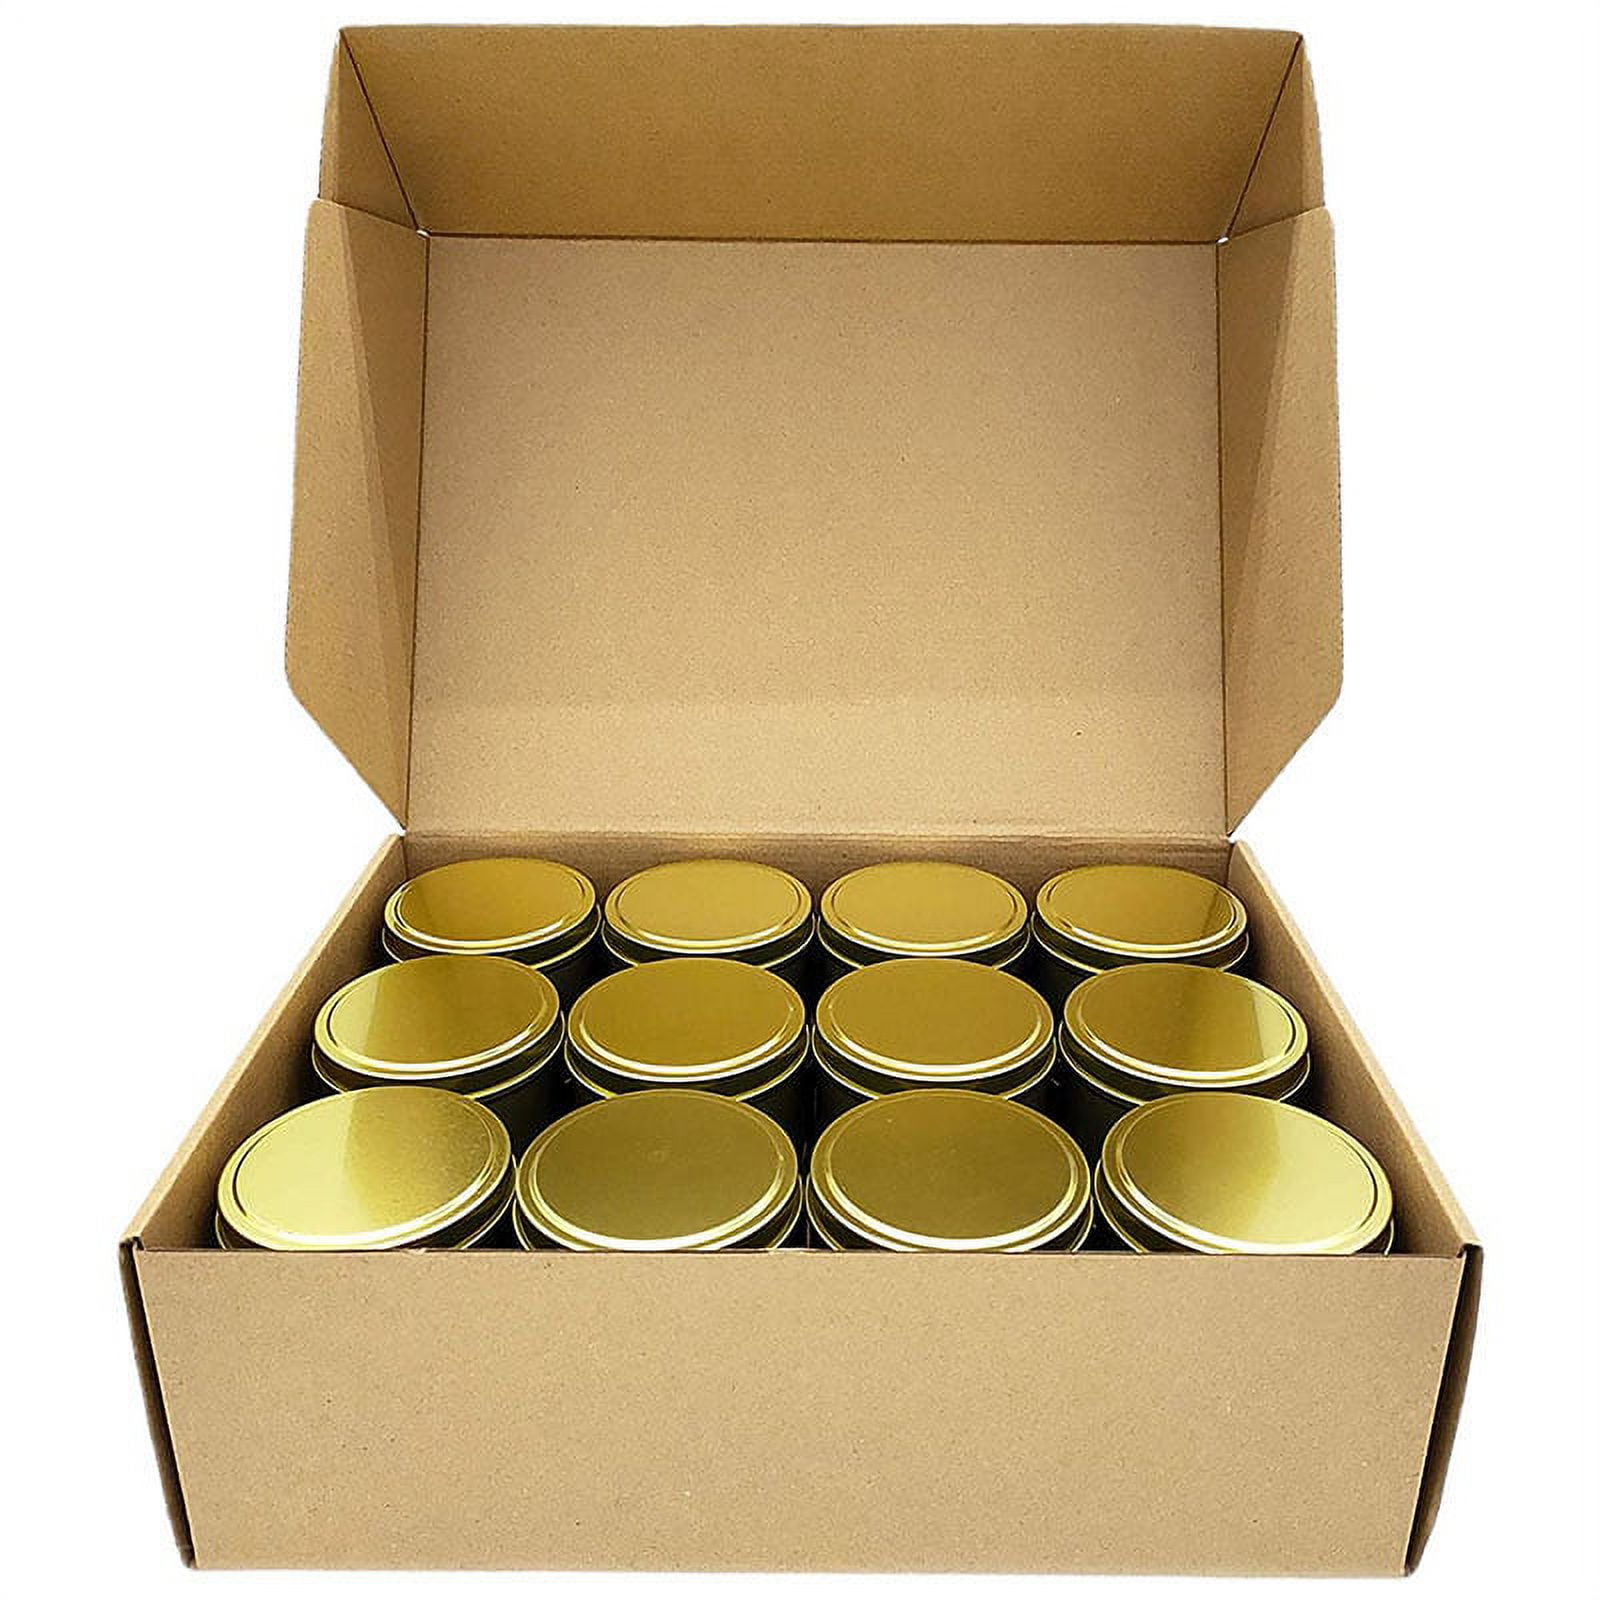 True Candle, 24x 8oz Candle tins